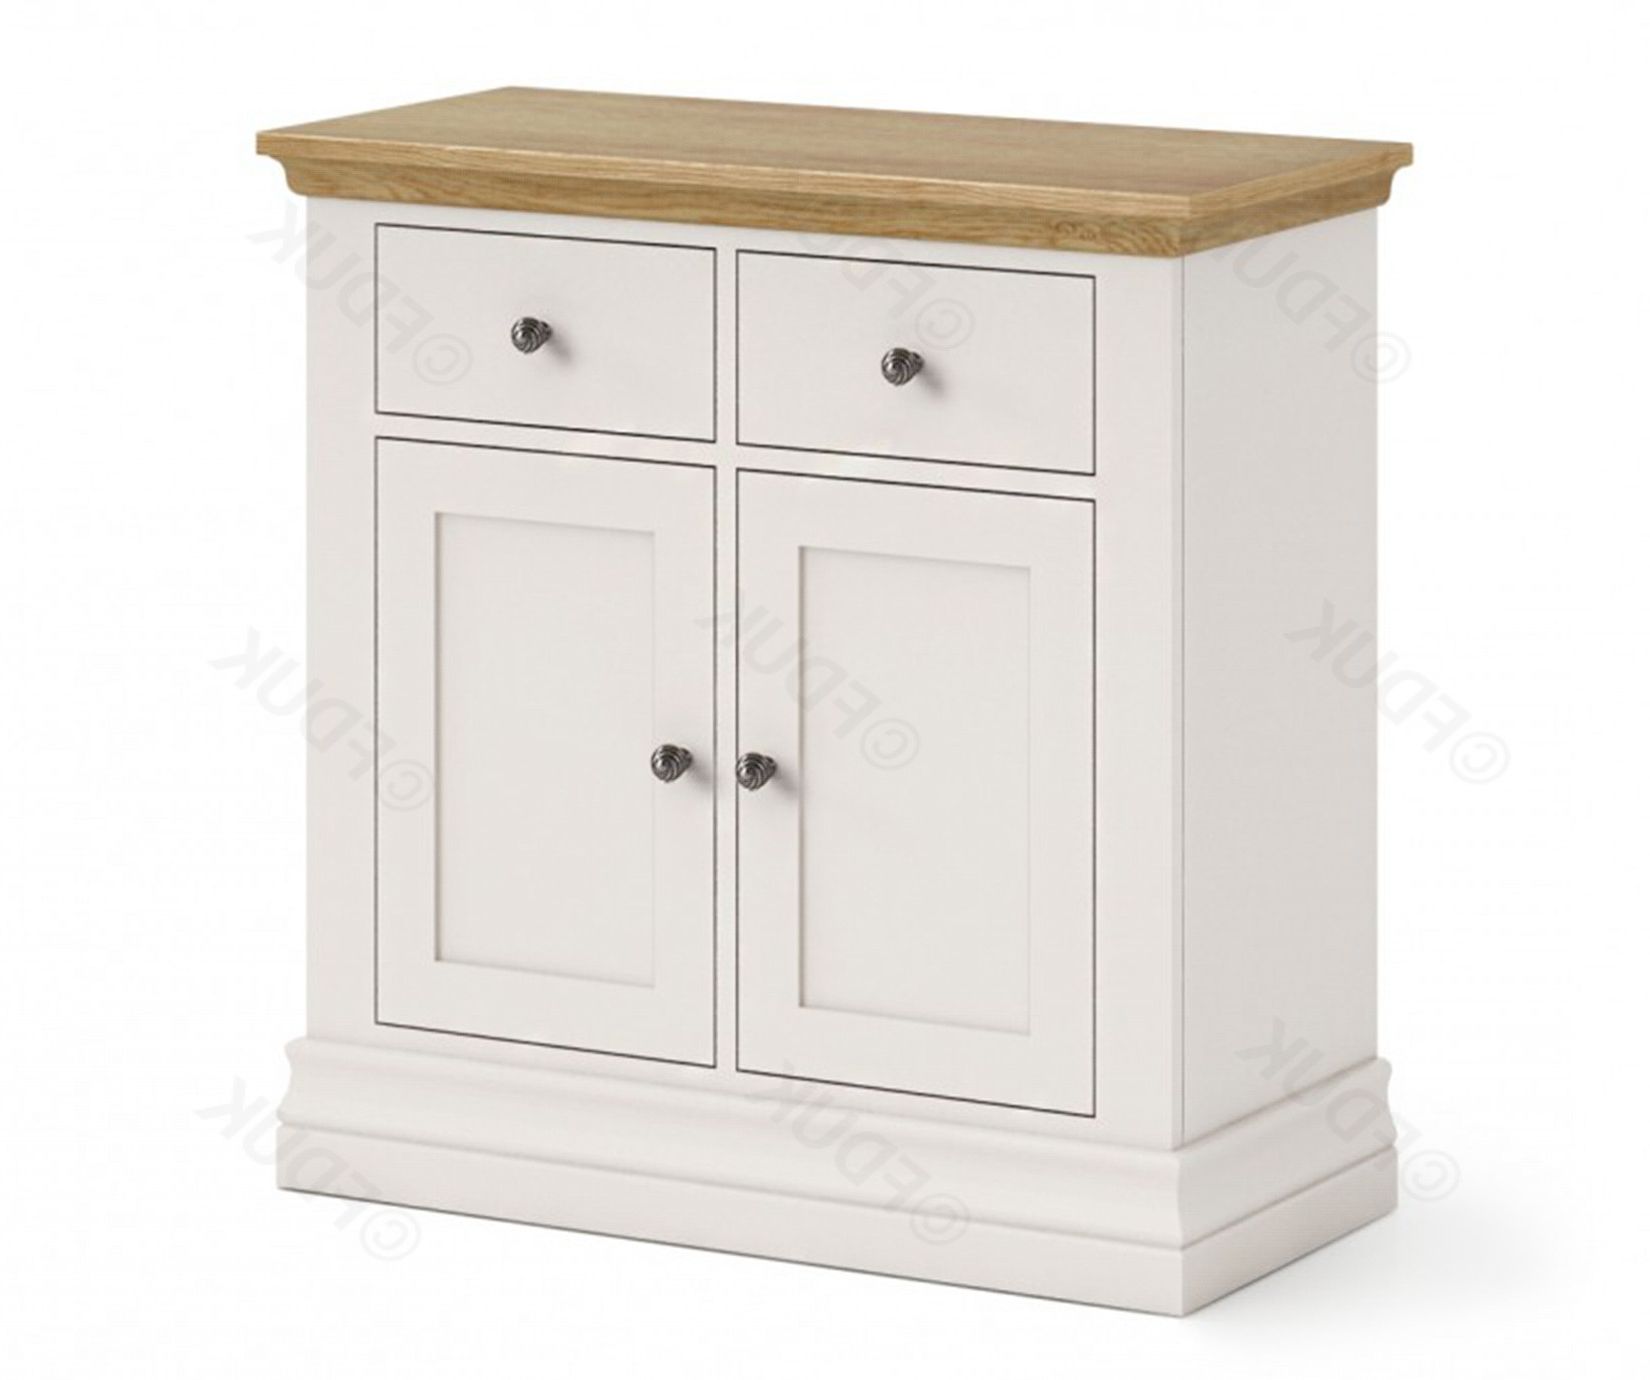 Corndell Annecy Mini Sideboard Fduk Best Price Guarantee We Will Beat Our  Competitors Price! Give Our Sales Team A Call On 0116 235 77 86 And We Will Within Annecy Sideboards (View 5 of 20)